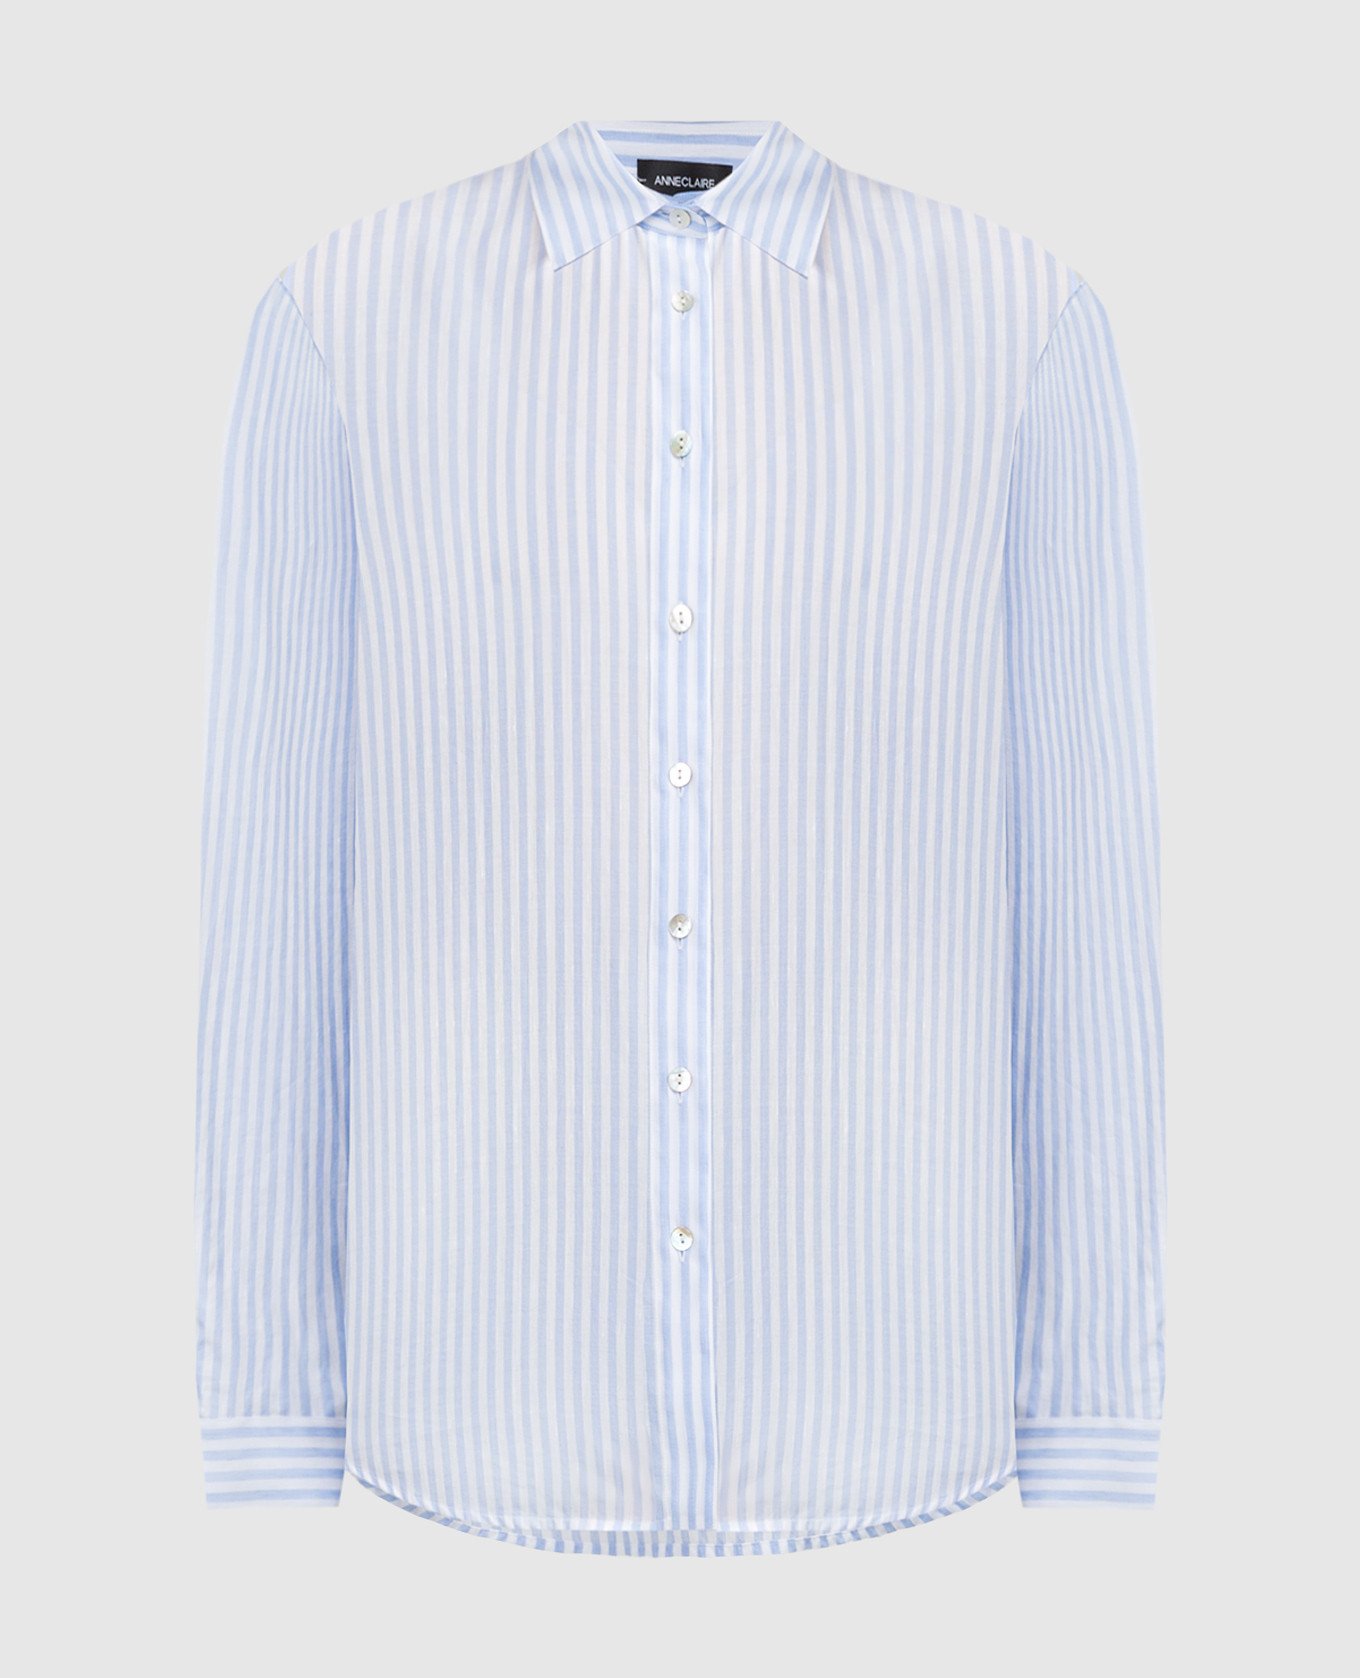 Blue striped shirt with linen